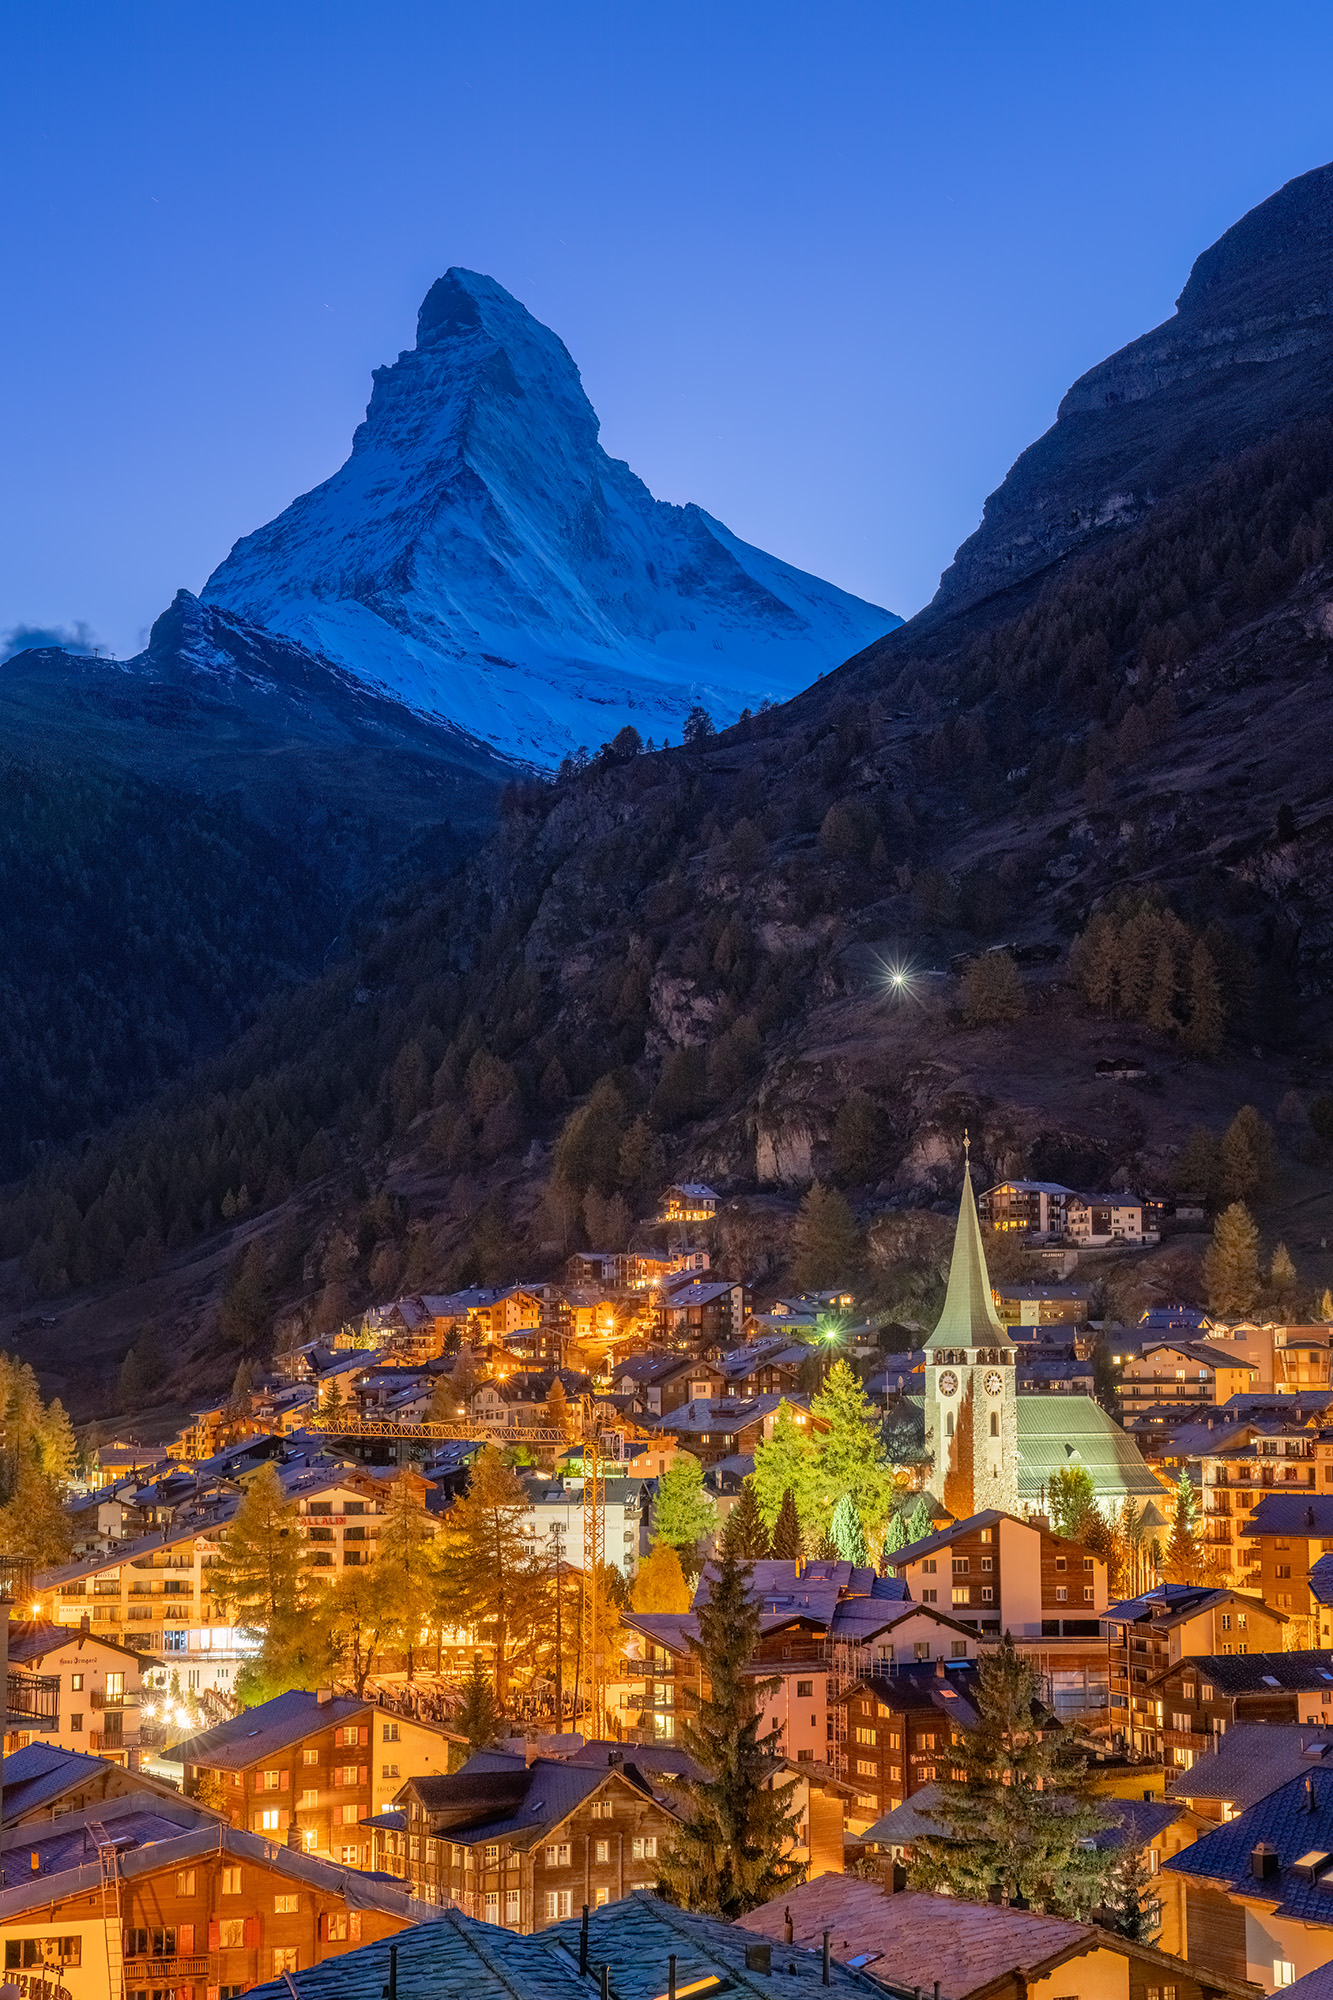 In "Zermatt's Twilight Embrace," the iconic Matterhorn watches over the warmly lit village during the blue hour in Switzerland...